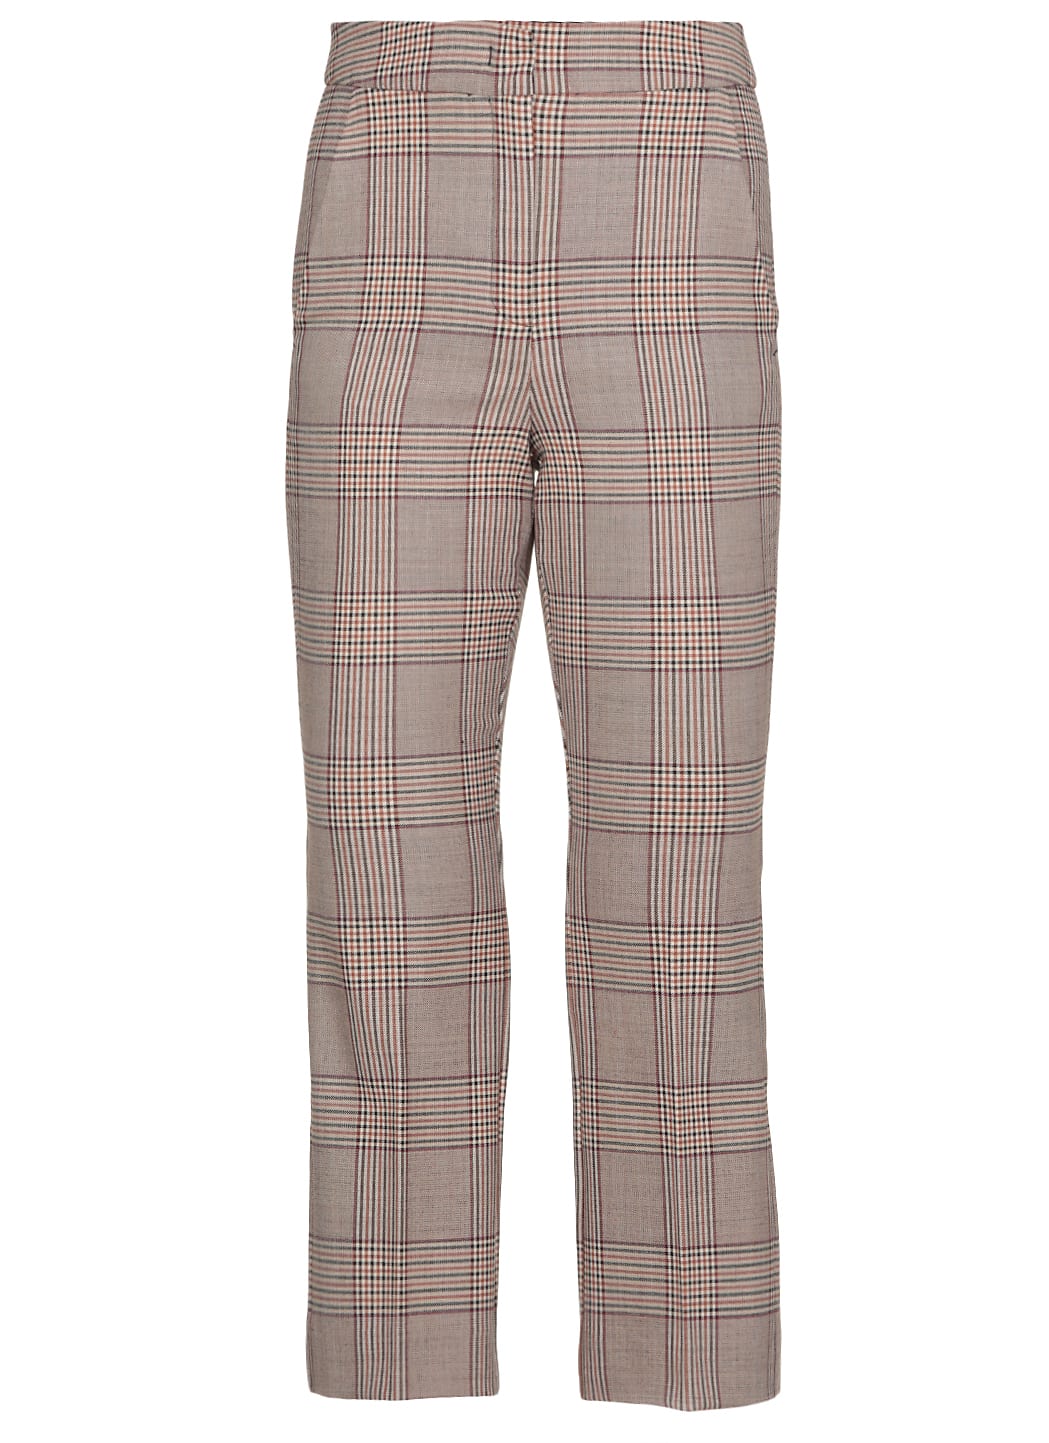 Marella Glencheck Patterned Trousers